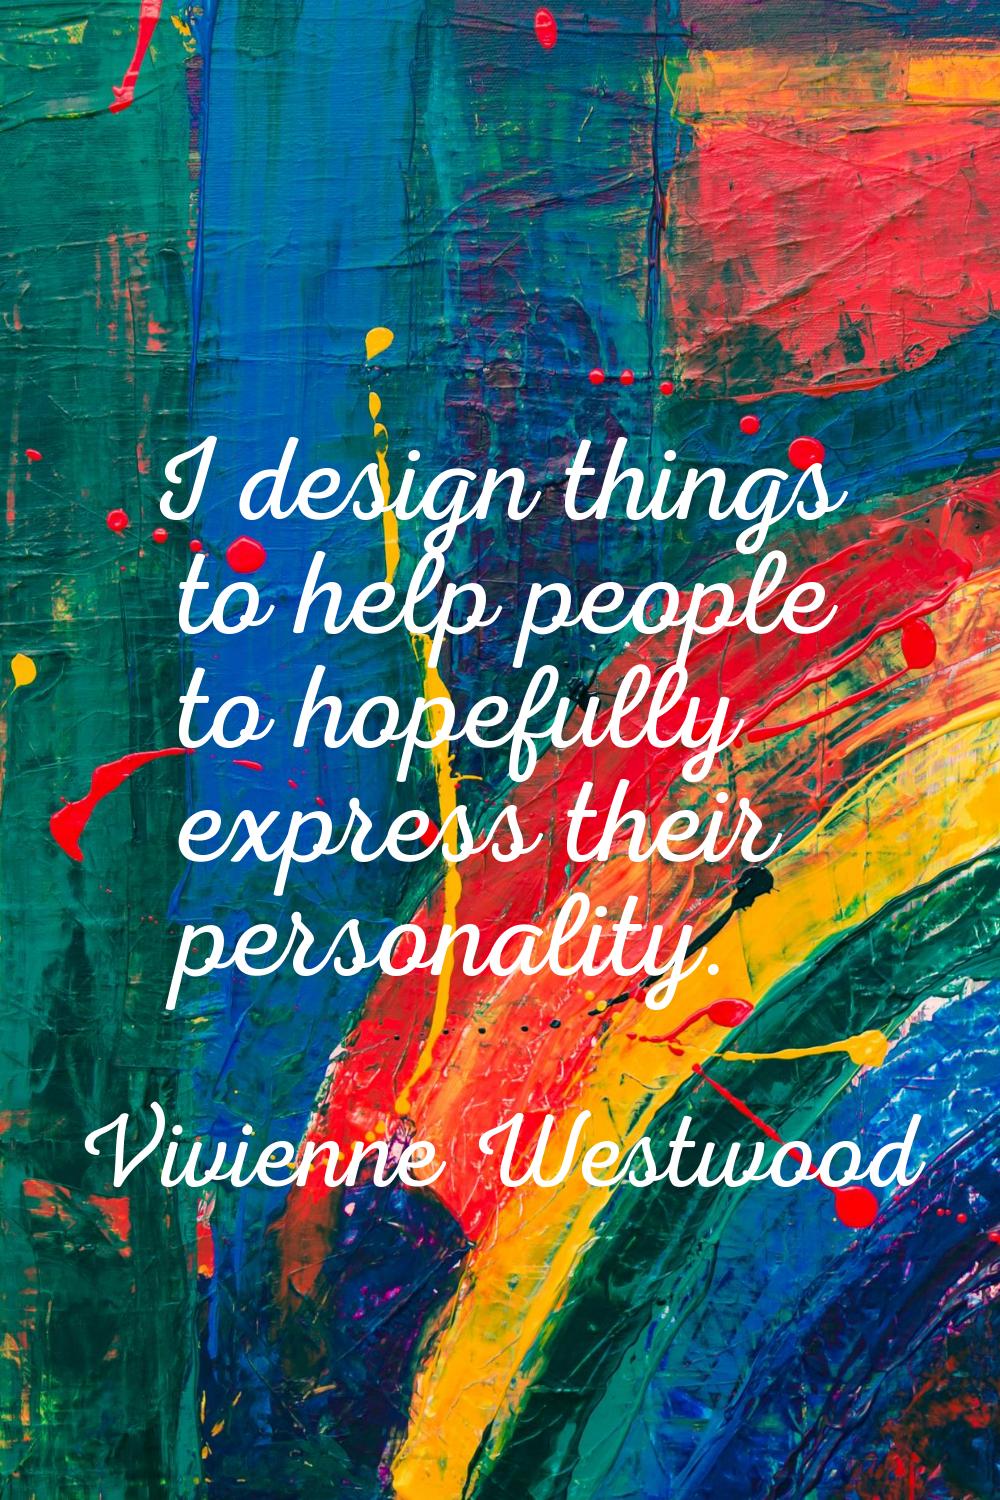 I design things to help people to hopefully express their personality.